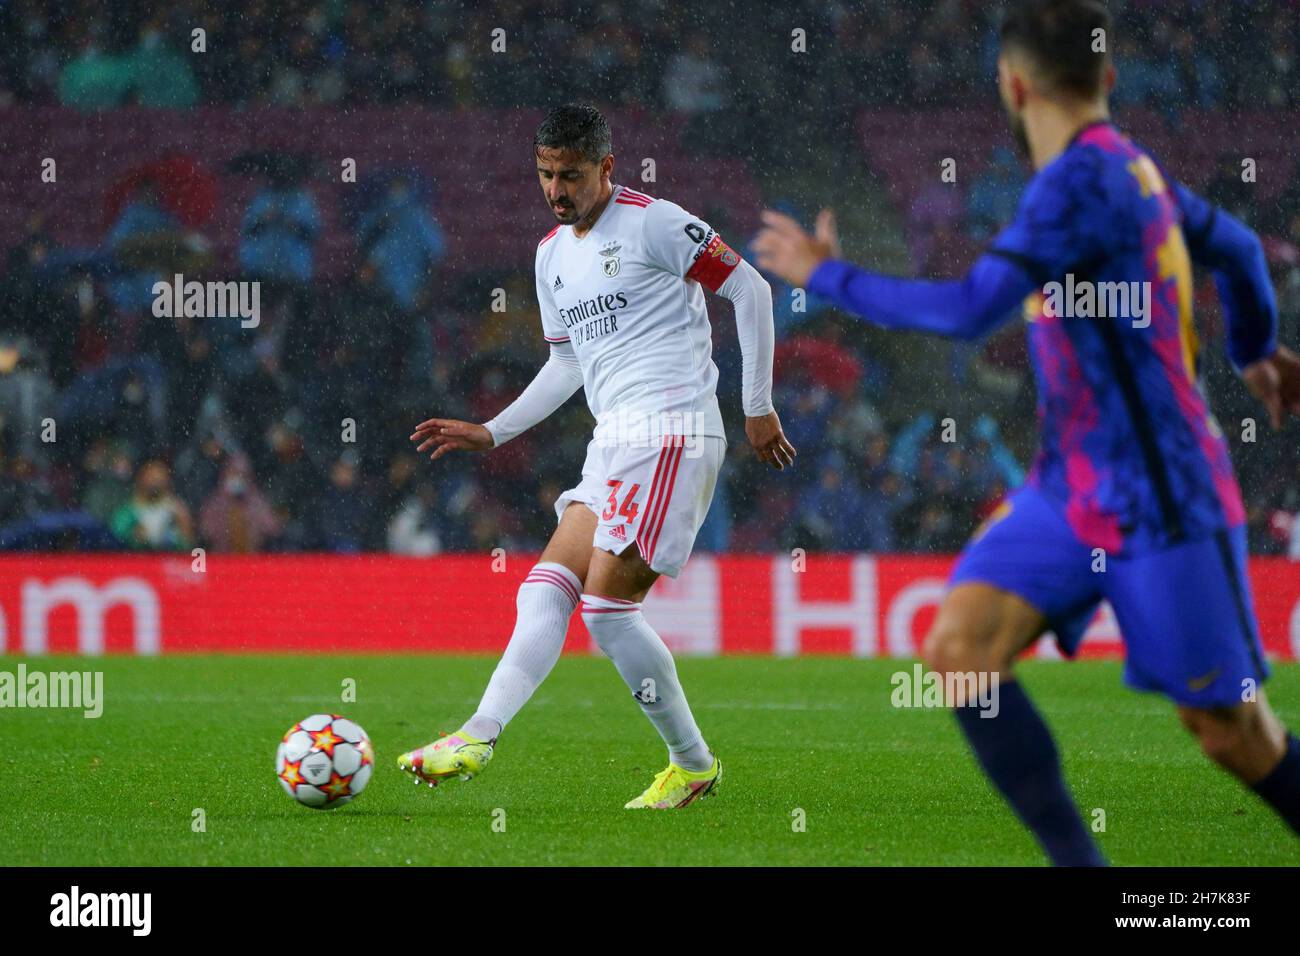 Barcelona, Spain. 23rd November 2021; Nou Camp, Barcelona, Spain: Champions League football, FC Barcelona versus Benfica: Andre Almeida takes a shot at goal Credit: Action Plus Sports Images/Alamy Live News Stock Photo